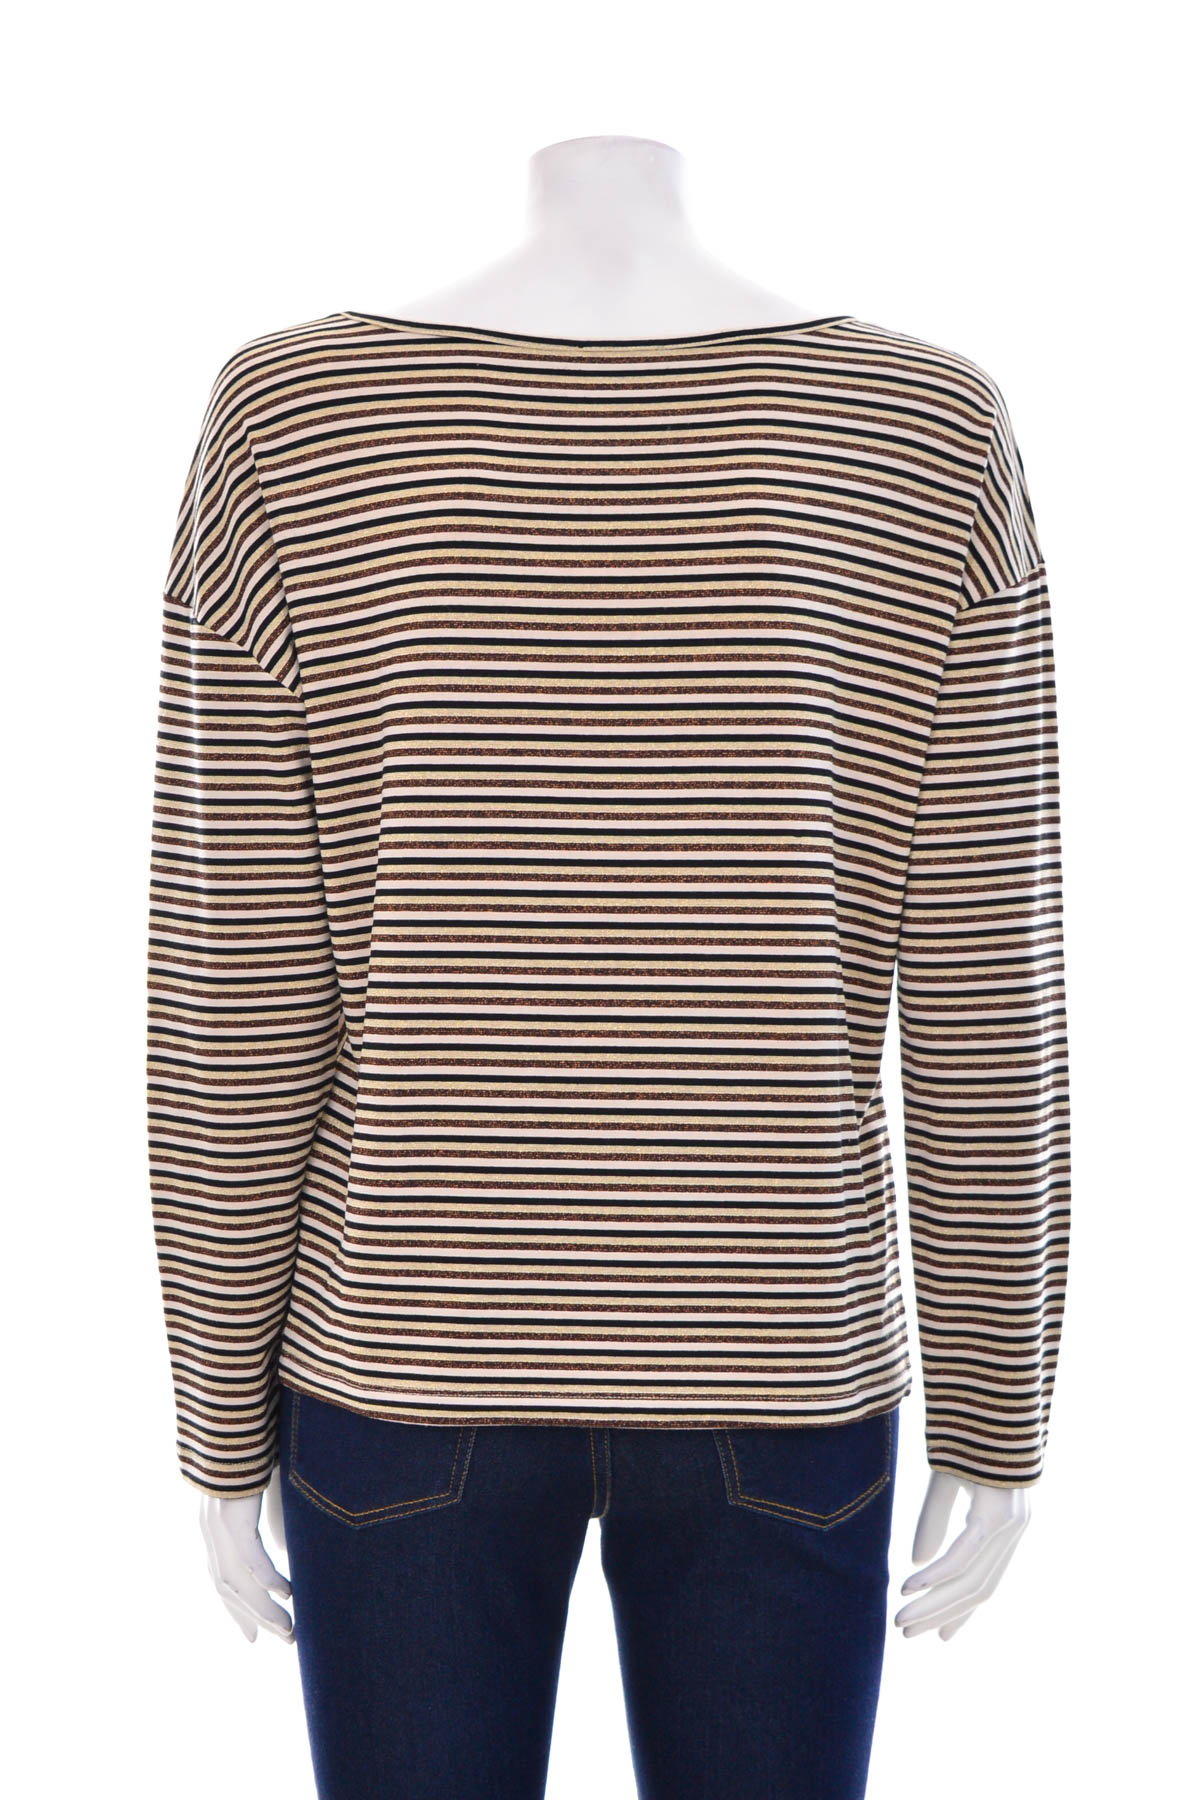 Women's sweater - More & More - 1